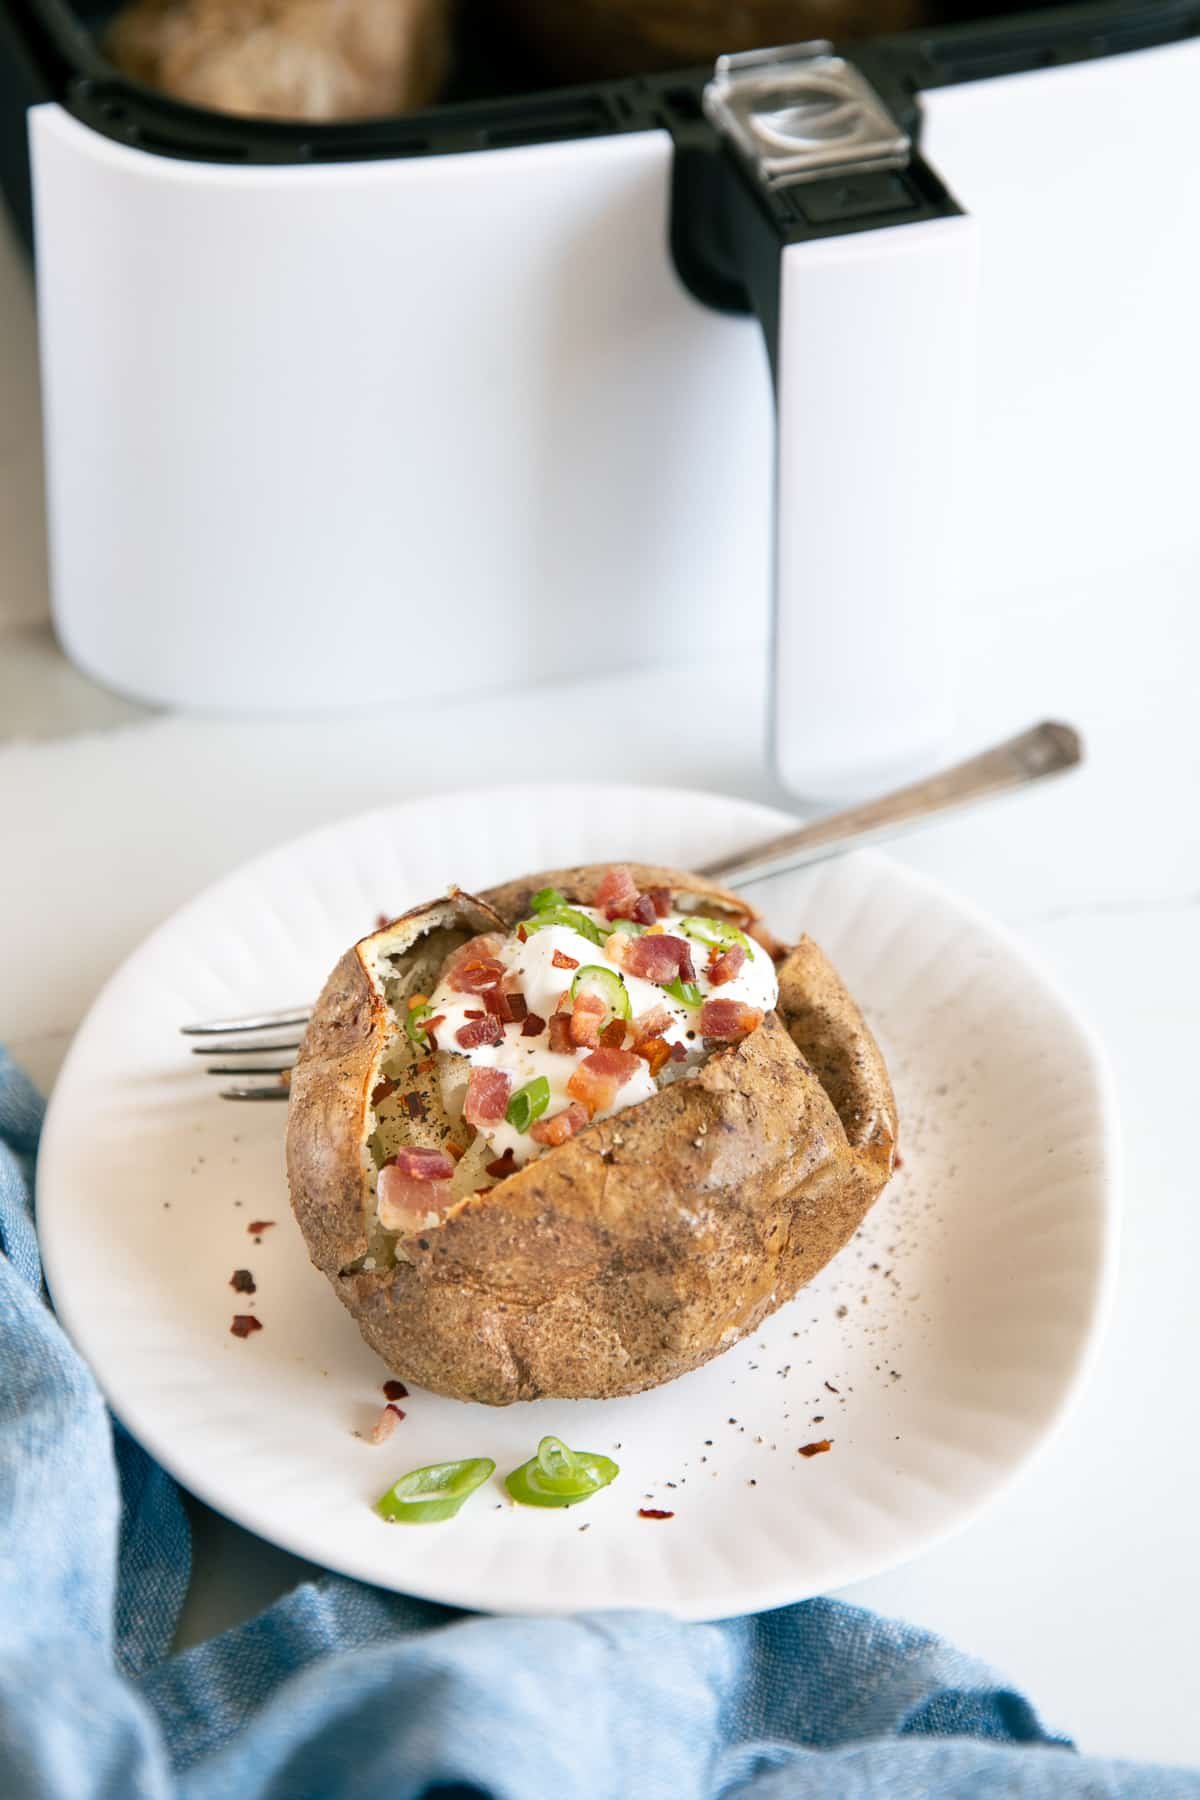 Small white plate with a baked potato topped with sour cream, bacon bits, green onions, and red pepper flakes with an air fryer basket in the background.